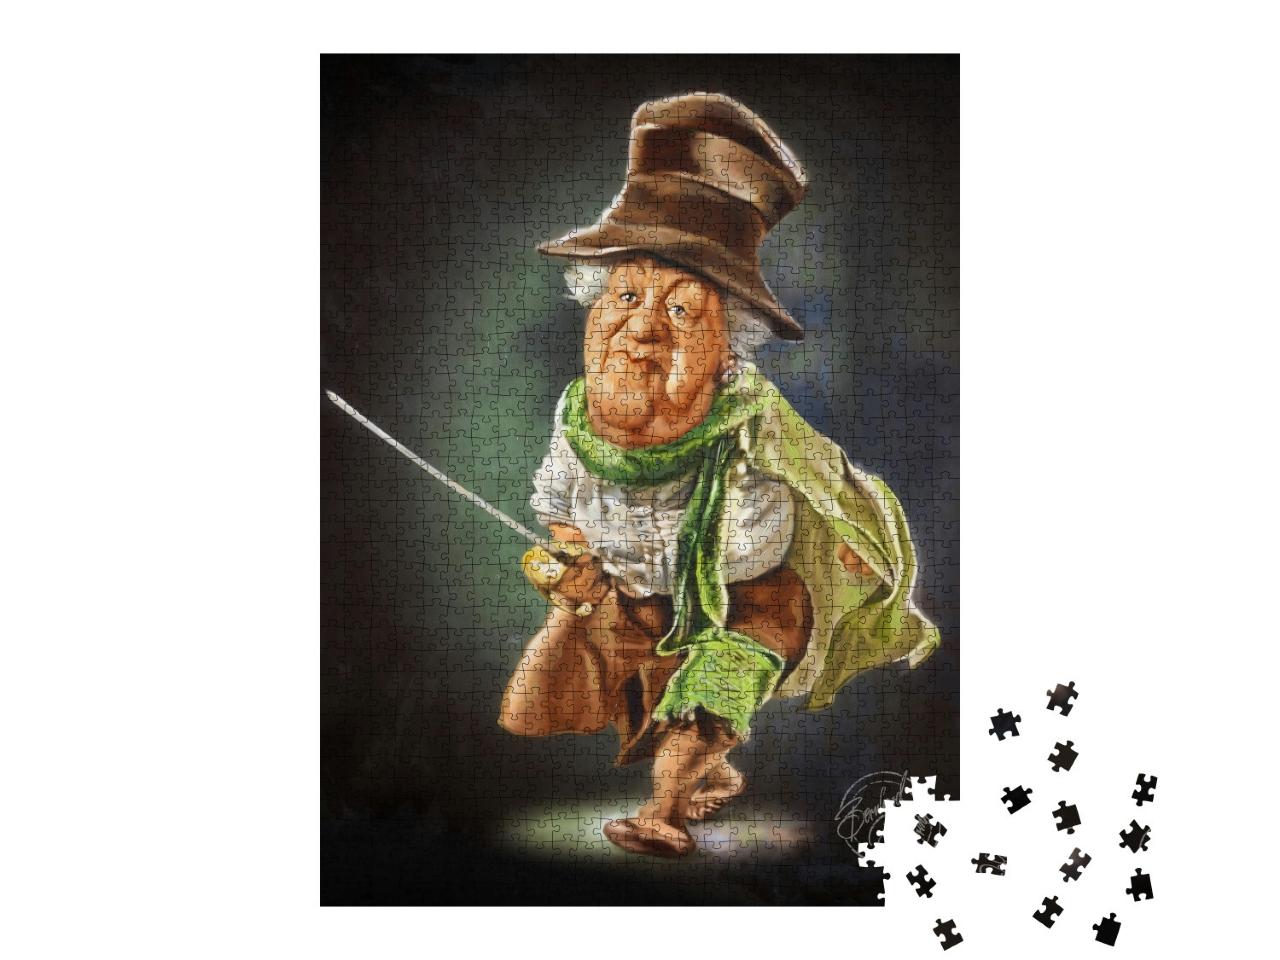 Miss Margaret Rutherford Portrait Jigsaw Puzzle with 1000 pieces